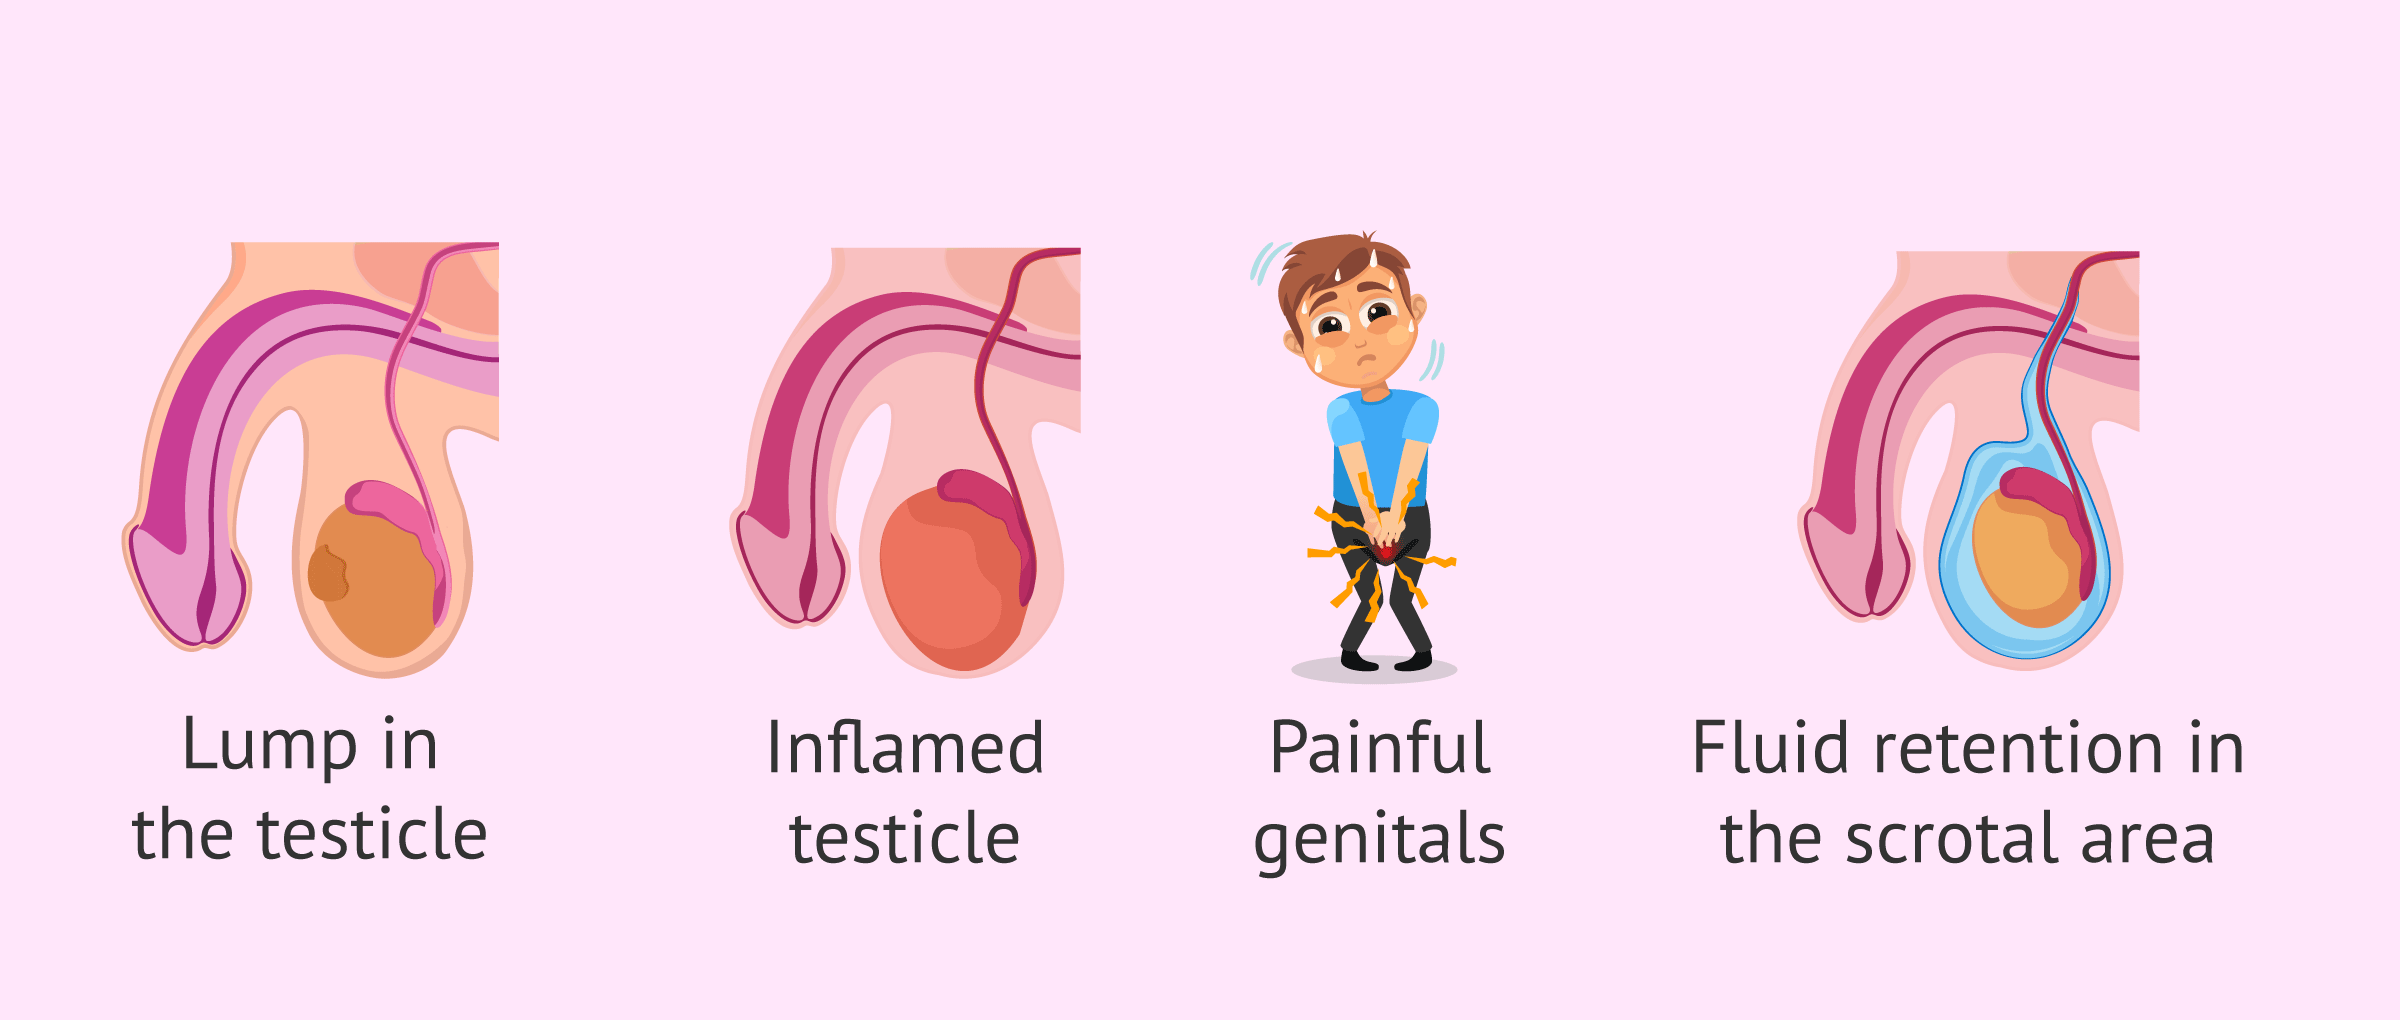 Possible symptoms of testicular cancer